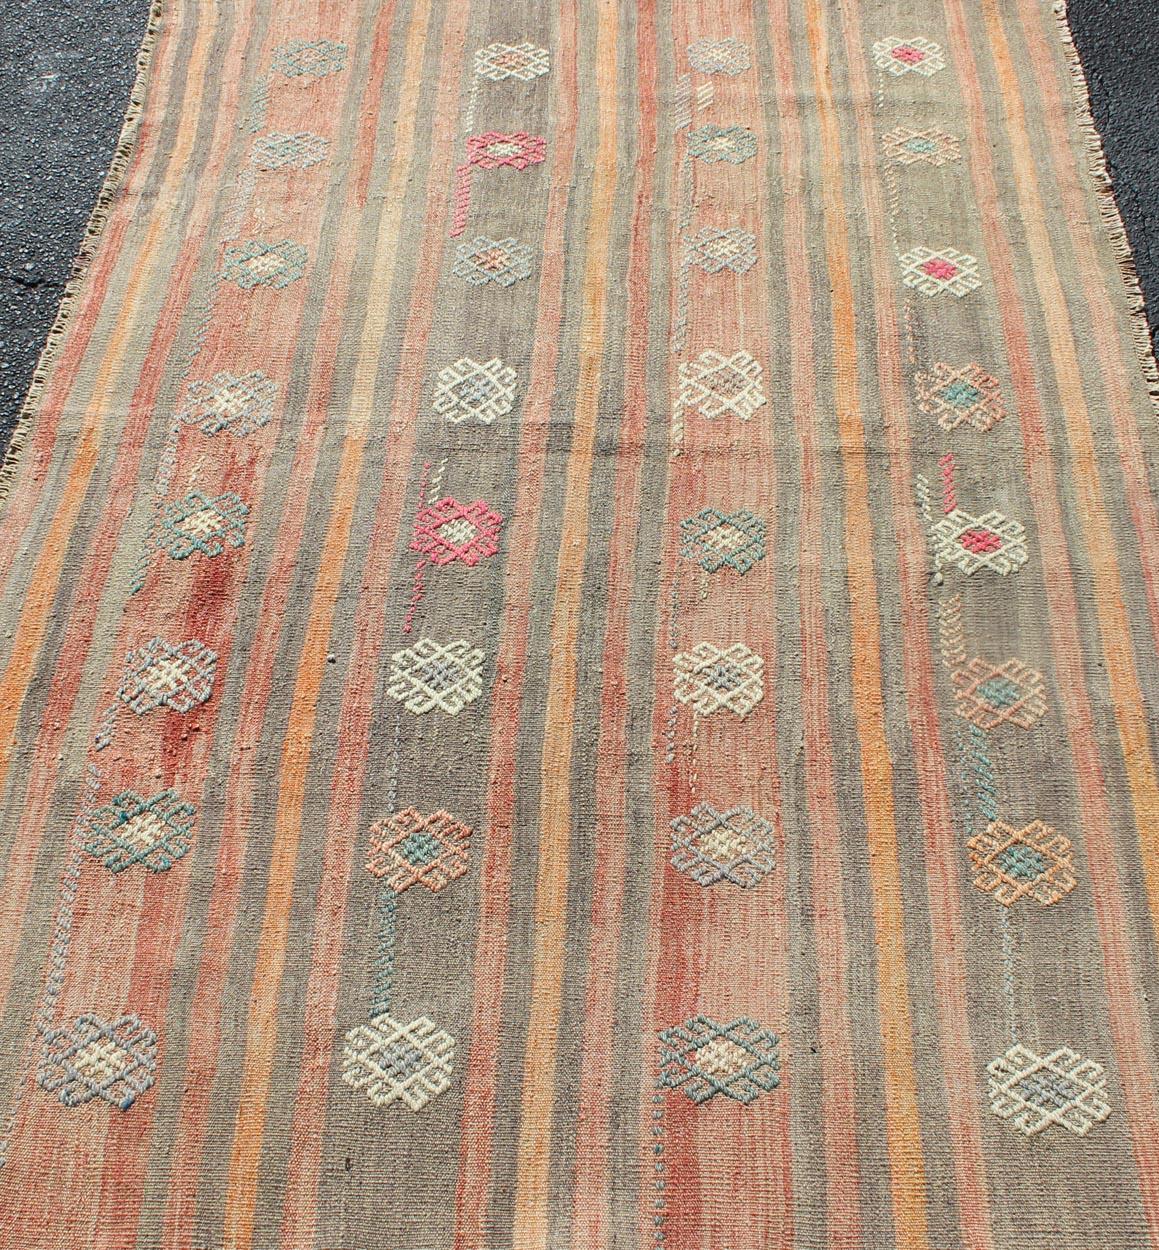 Wool Colorful Vintage Turkish Flat-Weave Kilim Rug with Striped Geometric Design For Sale